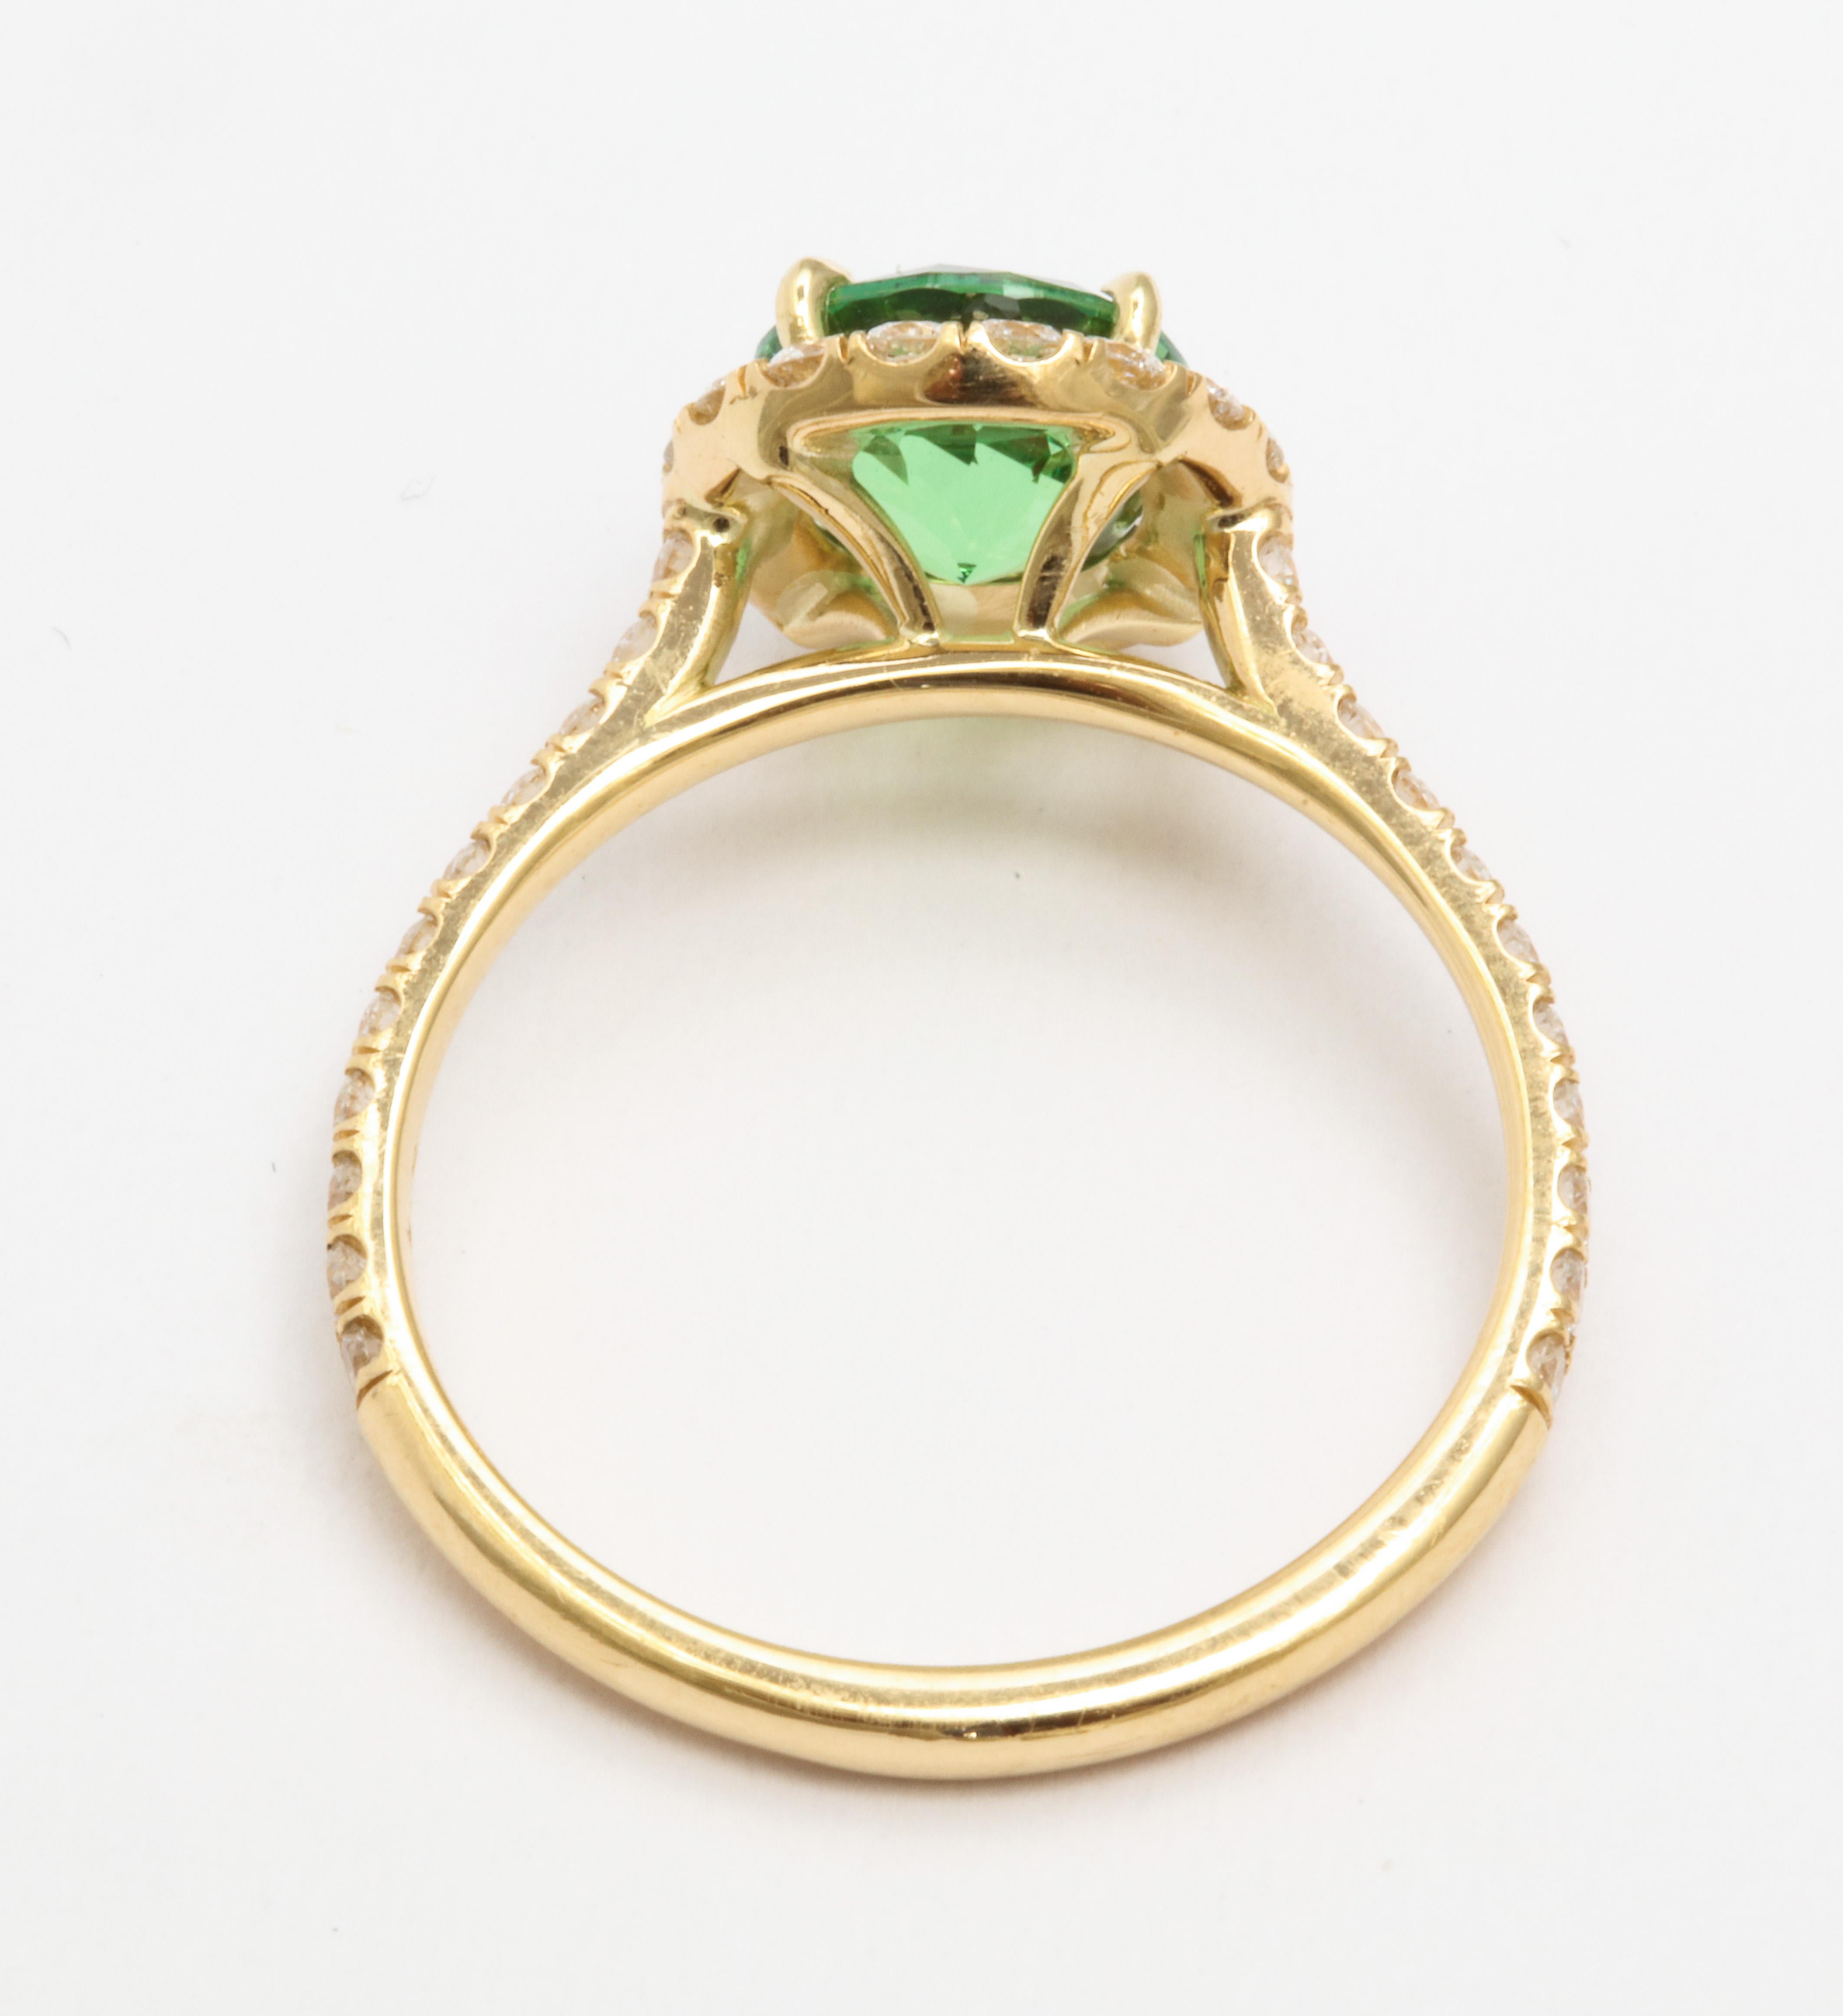 A ring set in 18 karat yellow gold featuring a 1.50 carat round green tsavorite. Surrounded by round brilliant diamonds with a total weight of 0.76 carats. Ring size 6. 
